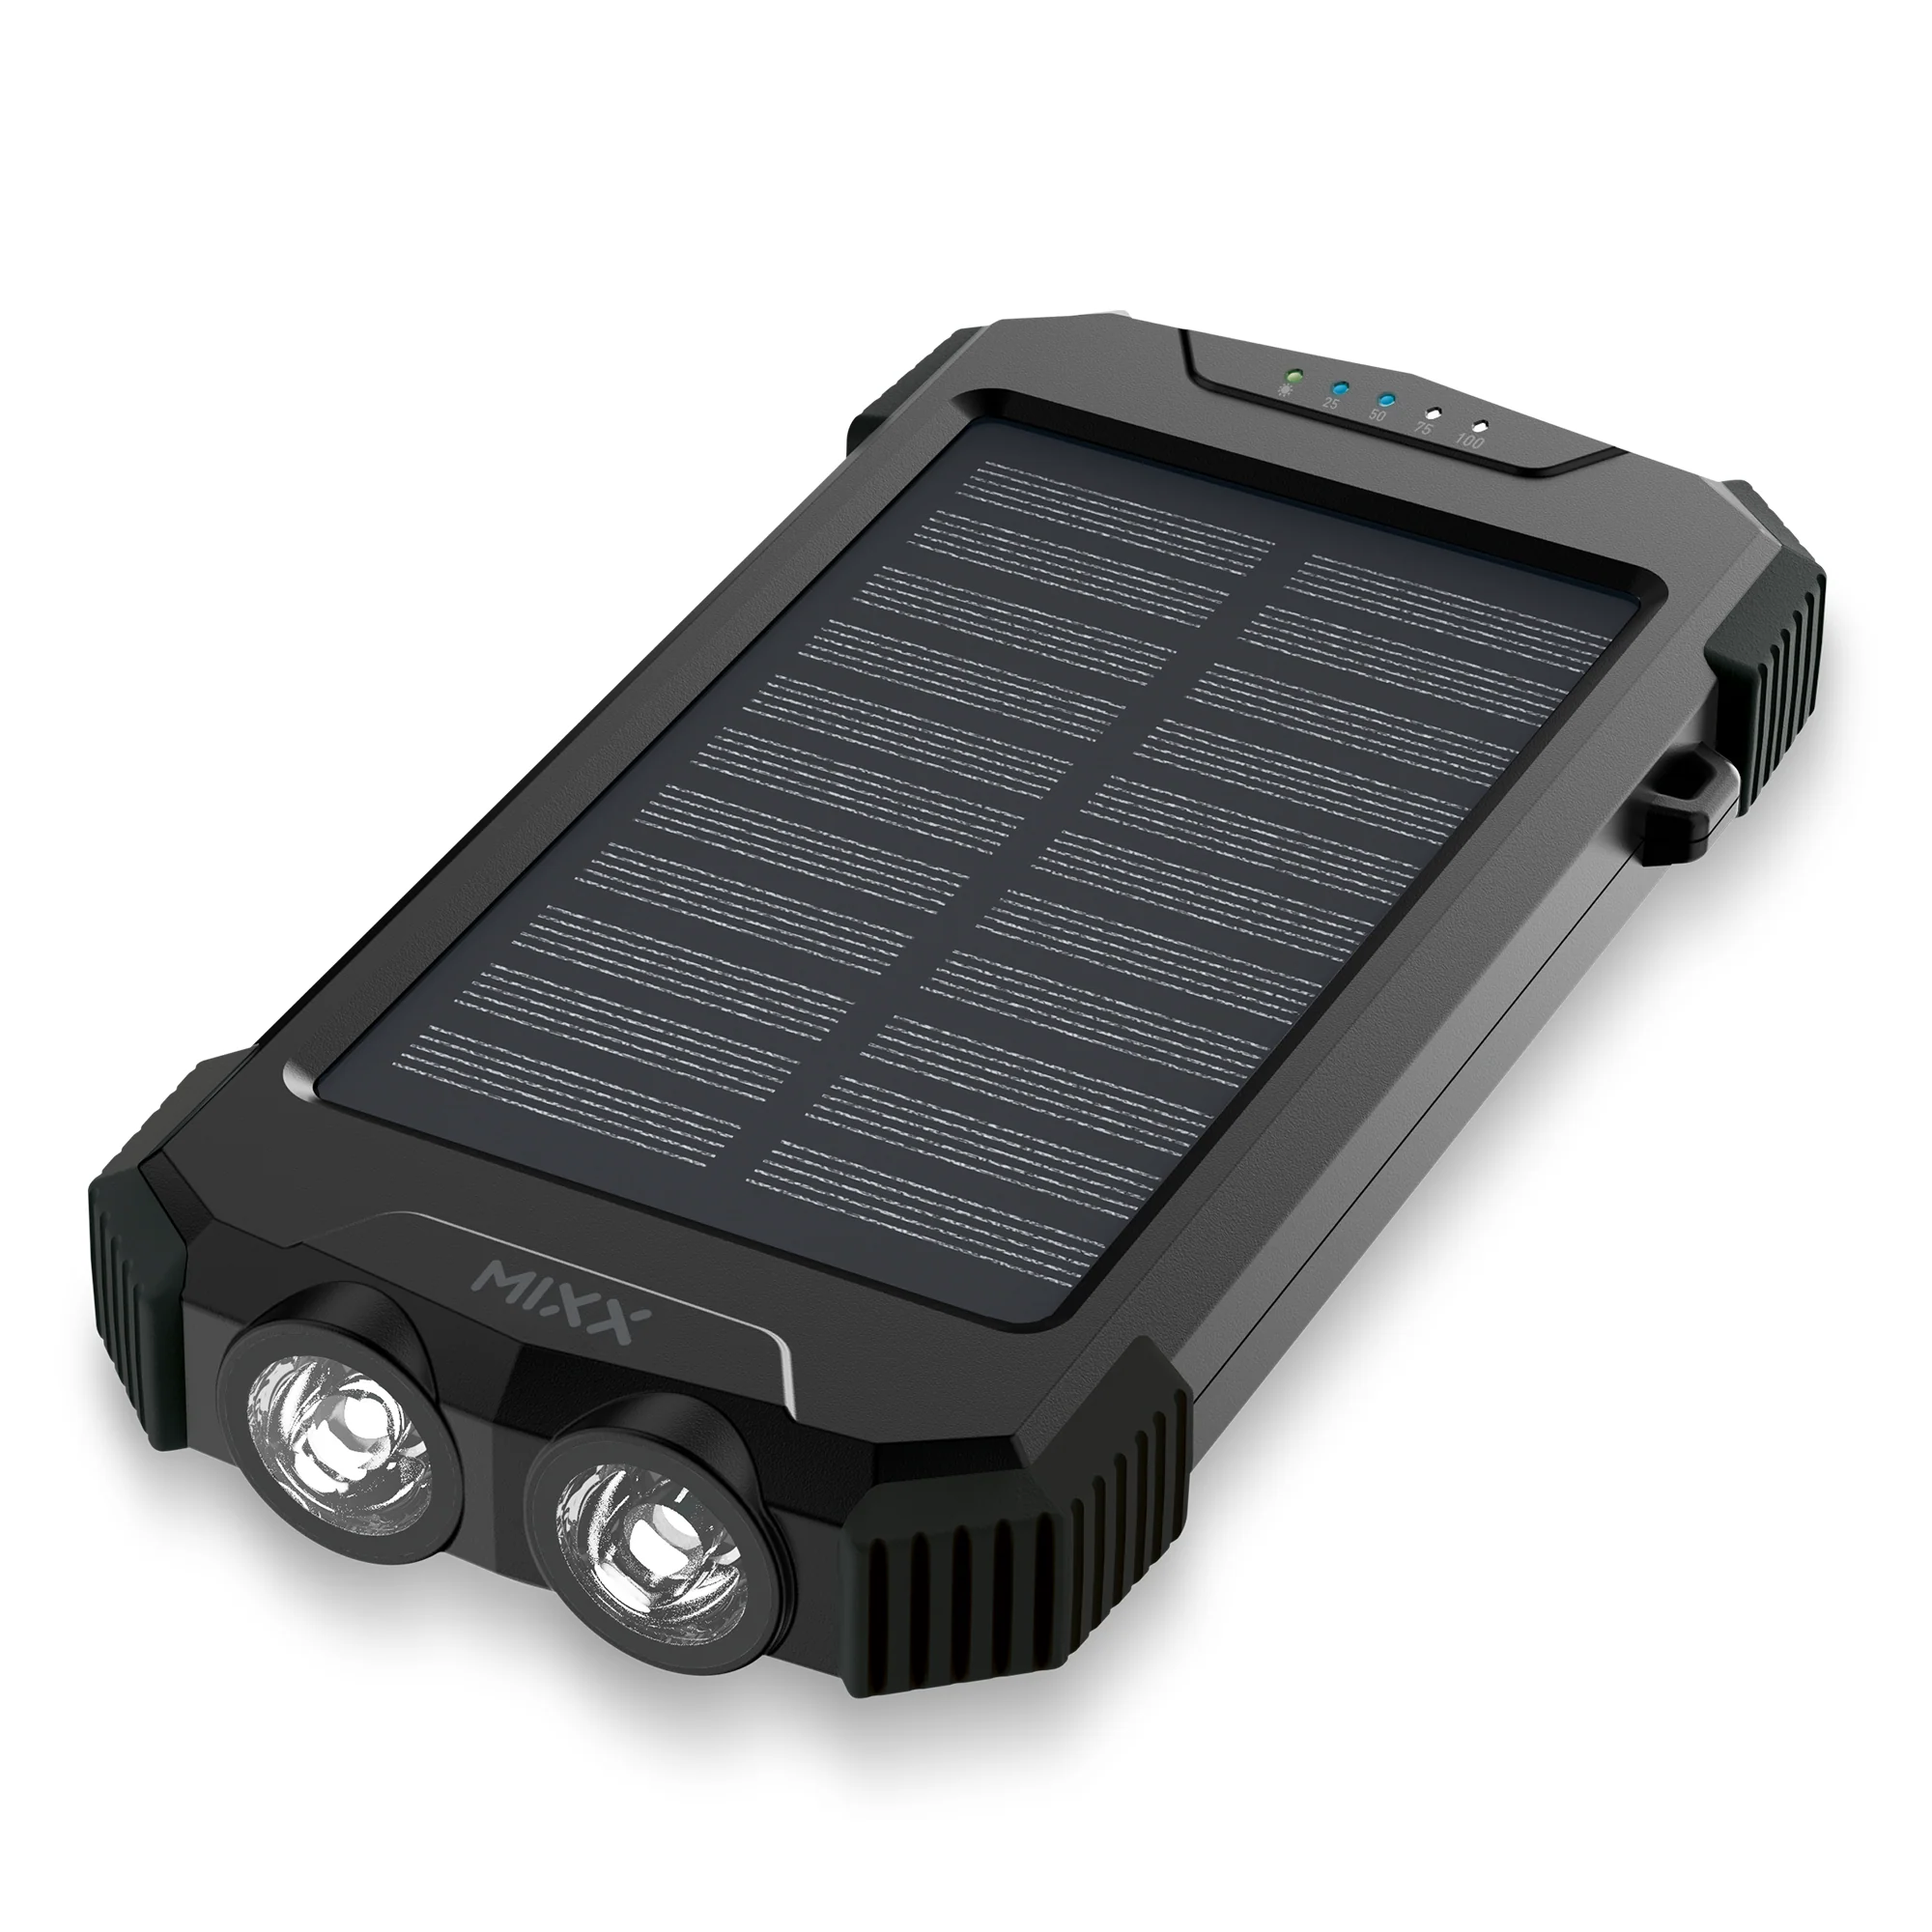 solar power bank, 25 All Sections Ads For Sale in Ireland